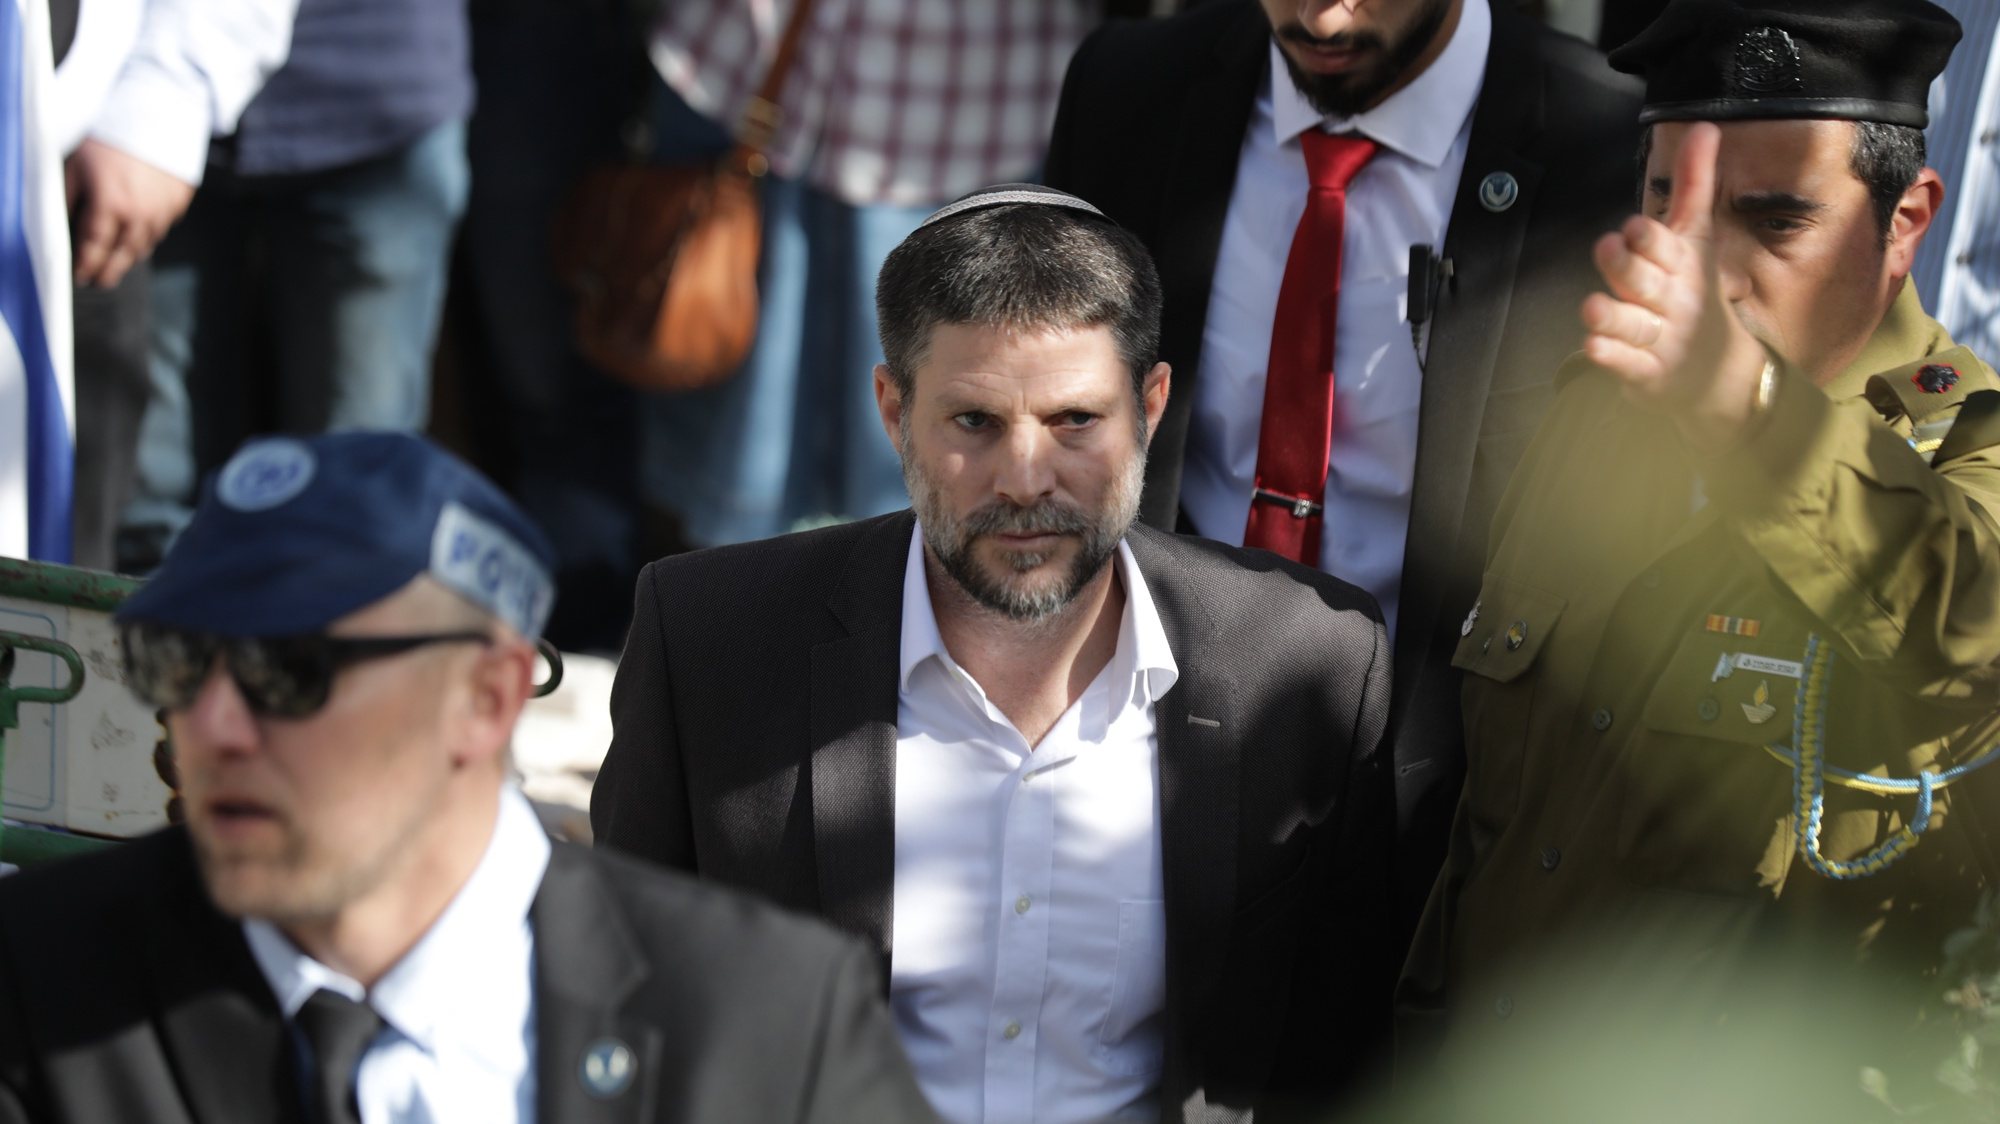 epa10493694 Israeli Finance Minister Bezalel Smotrich attends the funeral of two Israeli brothers Hillel and Yagel Yaniv at the Mount Herzl military cemetery in Jerusalem, 27 February 2023. Hillel and Yagel Yaniv were shot dead by a Palestinian driver on 26 February, as Israeli authorities said, near the Palestinian village of Hawara close to the city of Nablus in the West Bank.  EPA/ABIR SULTAN